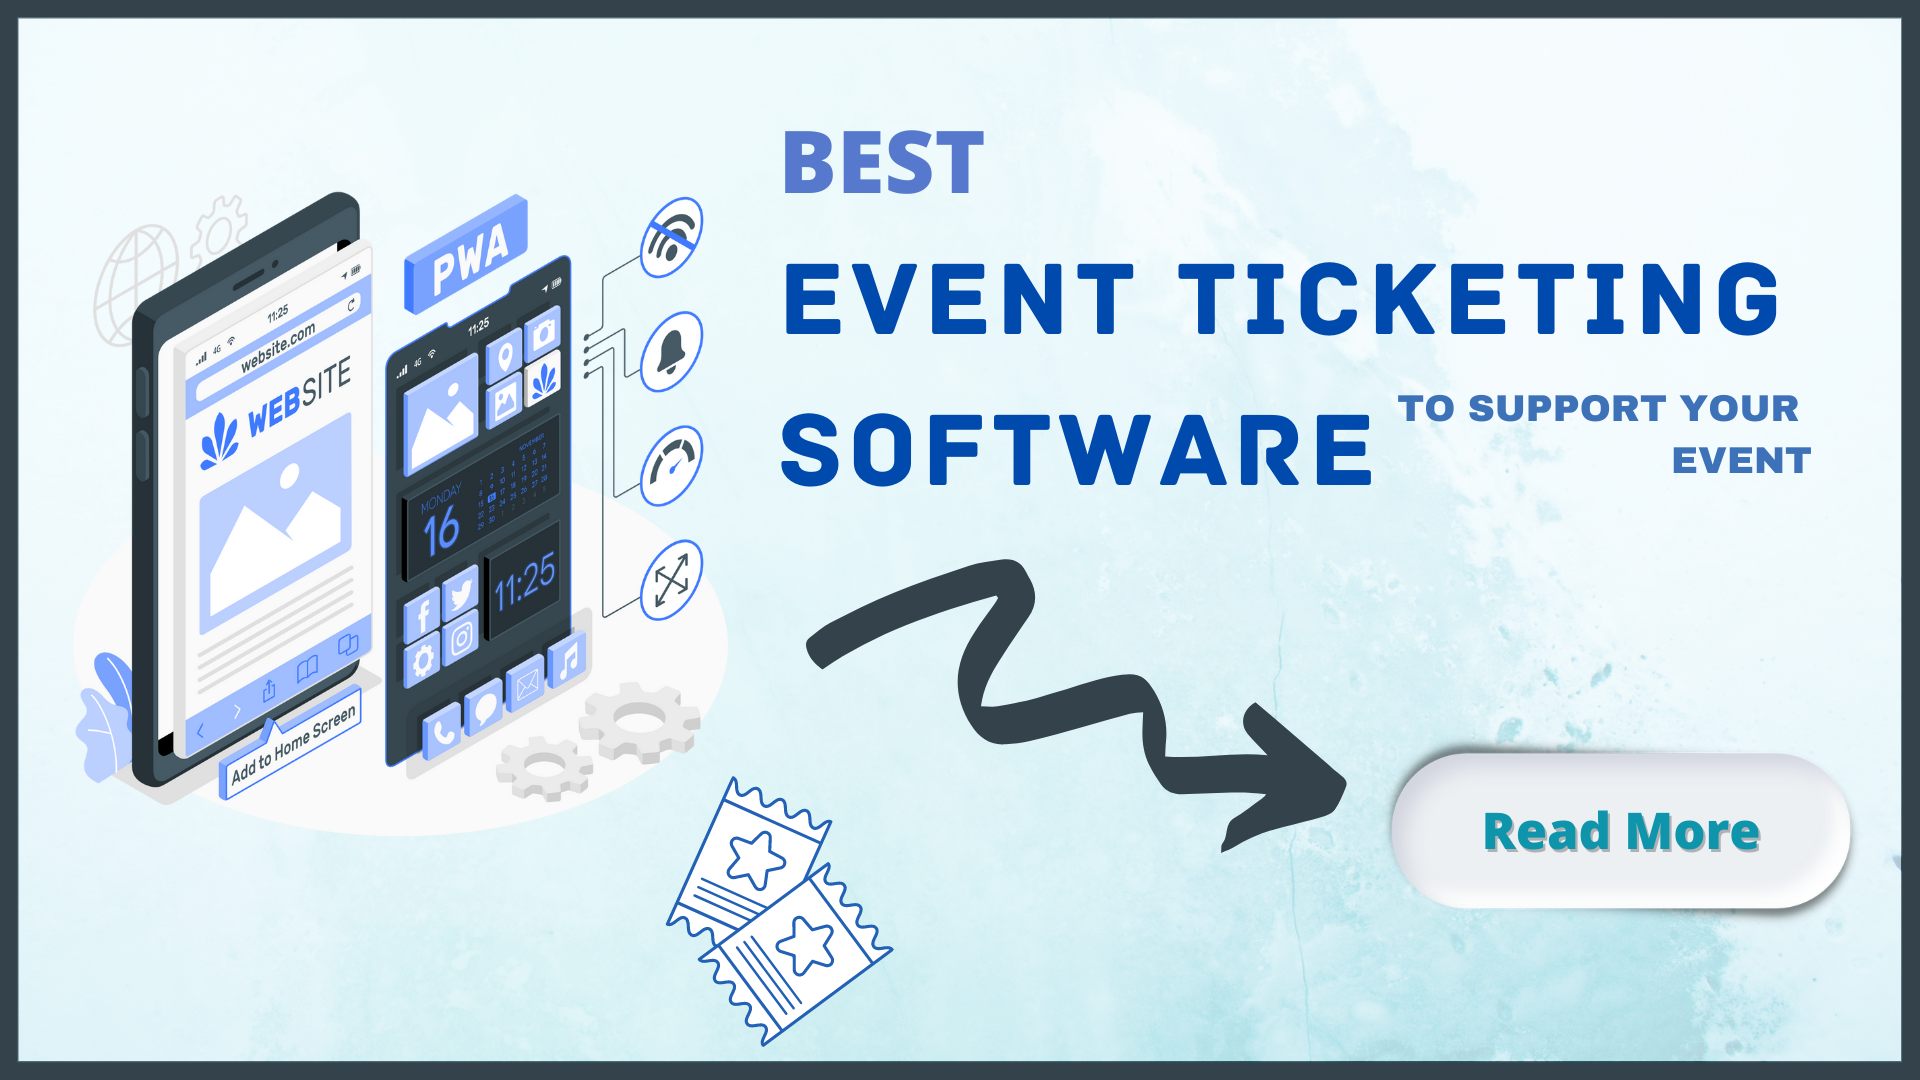 Best Event Ticketing Software To Support Your Event